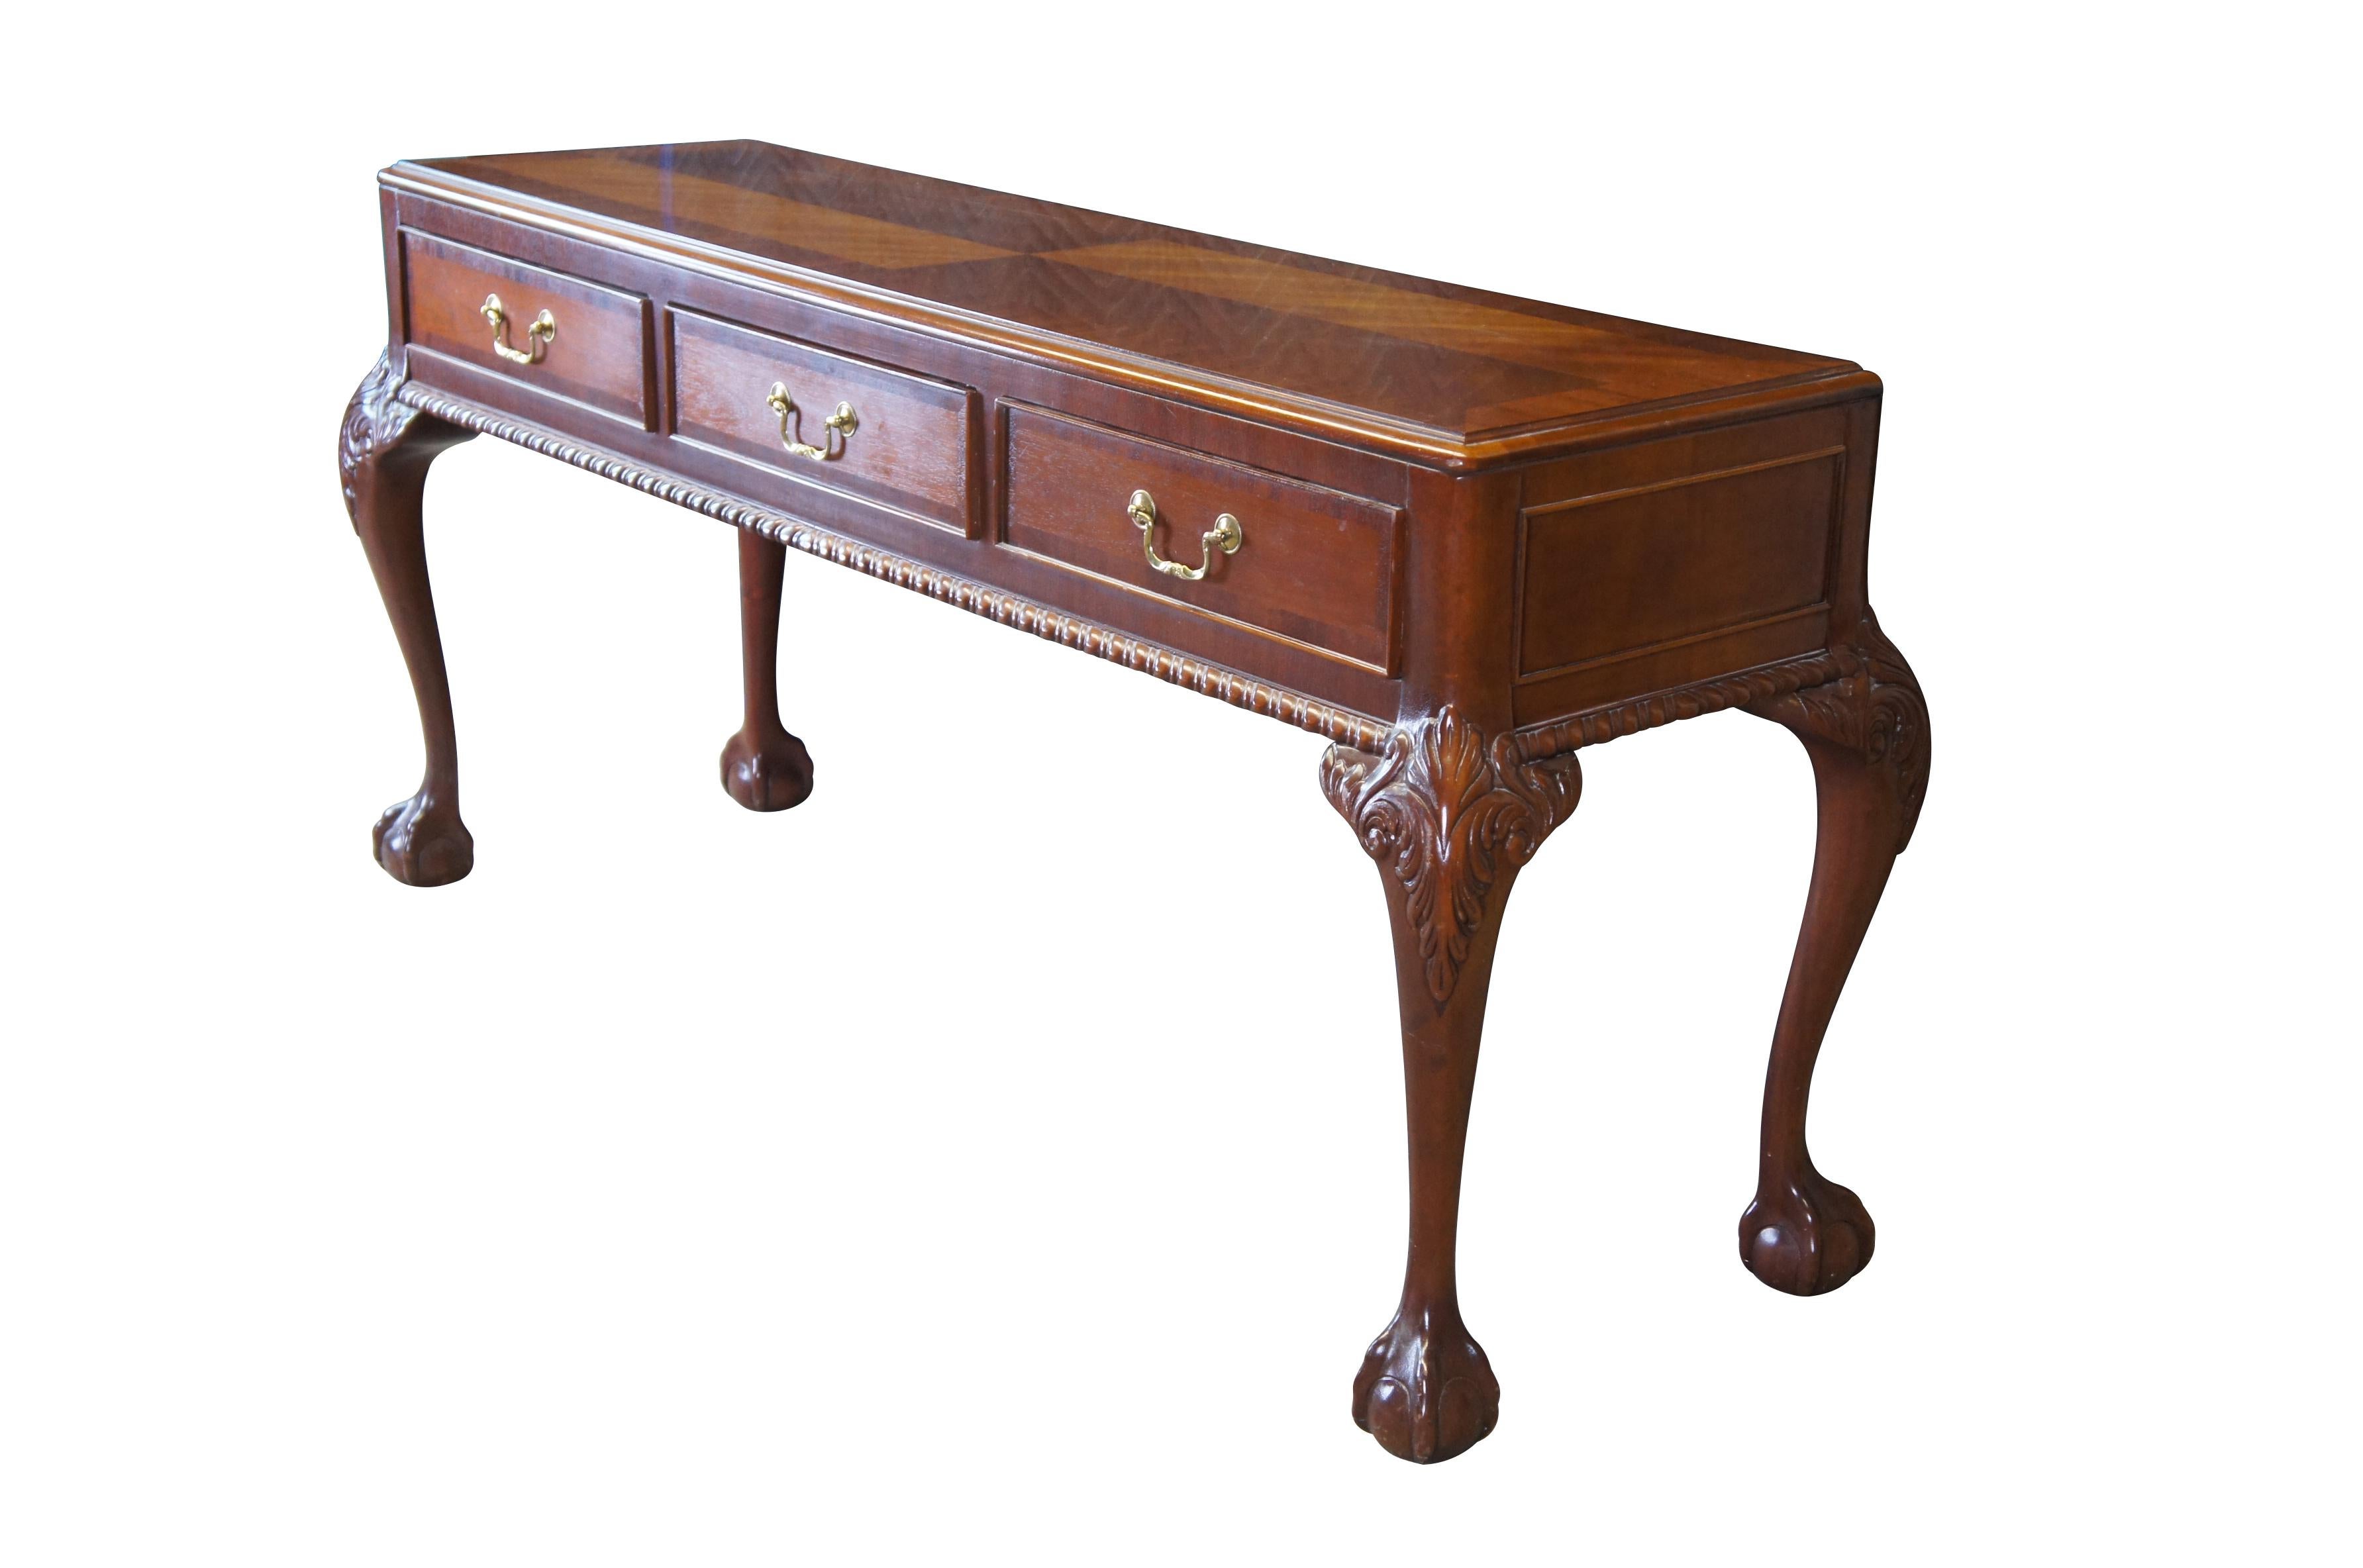 Mid 20th Century console or sofa table by Link Taylor.  Made from Solid Mahogany in Lexington, North Carolina.  Features a mahogany frame with matchbook top, features three dovetailed drawers within the frieze, brass bale hardware, gadrooning along